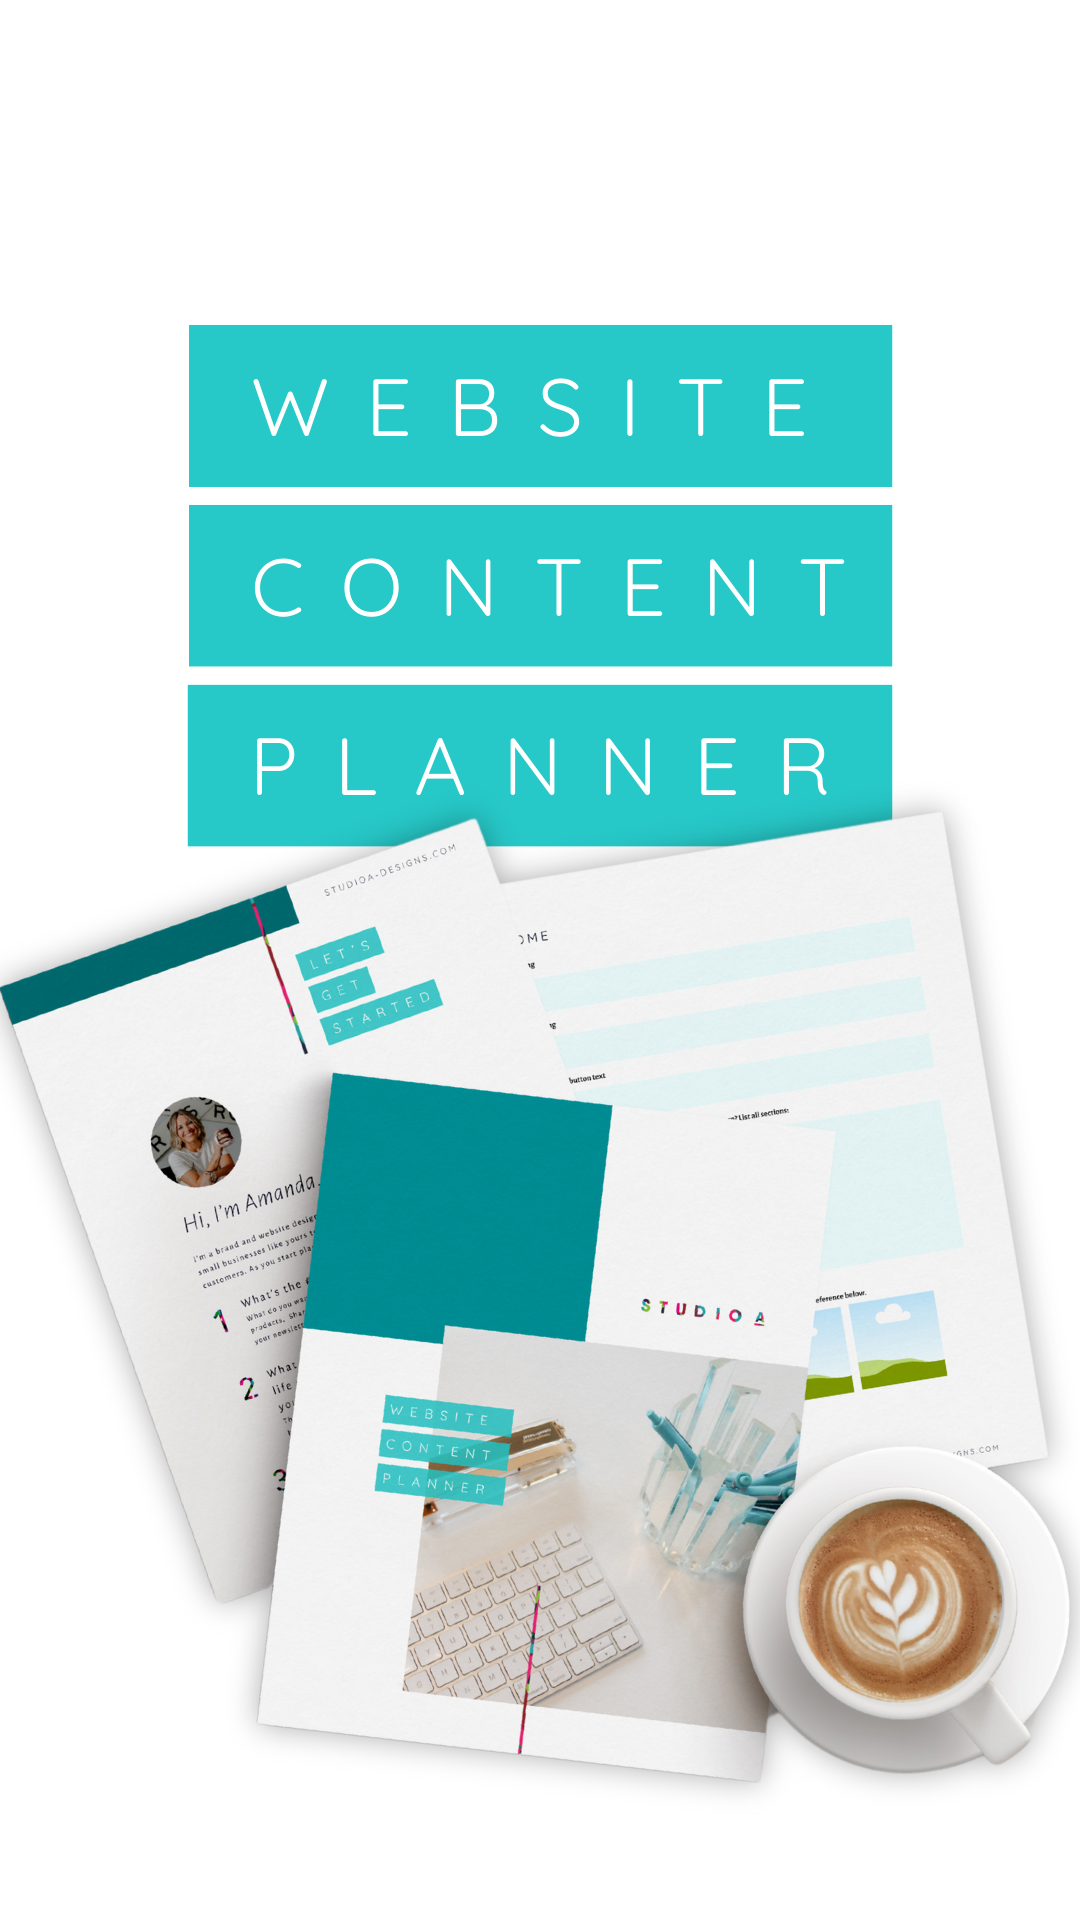 A website content planner is sitting on top of a table next to a cup of coffee.